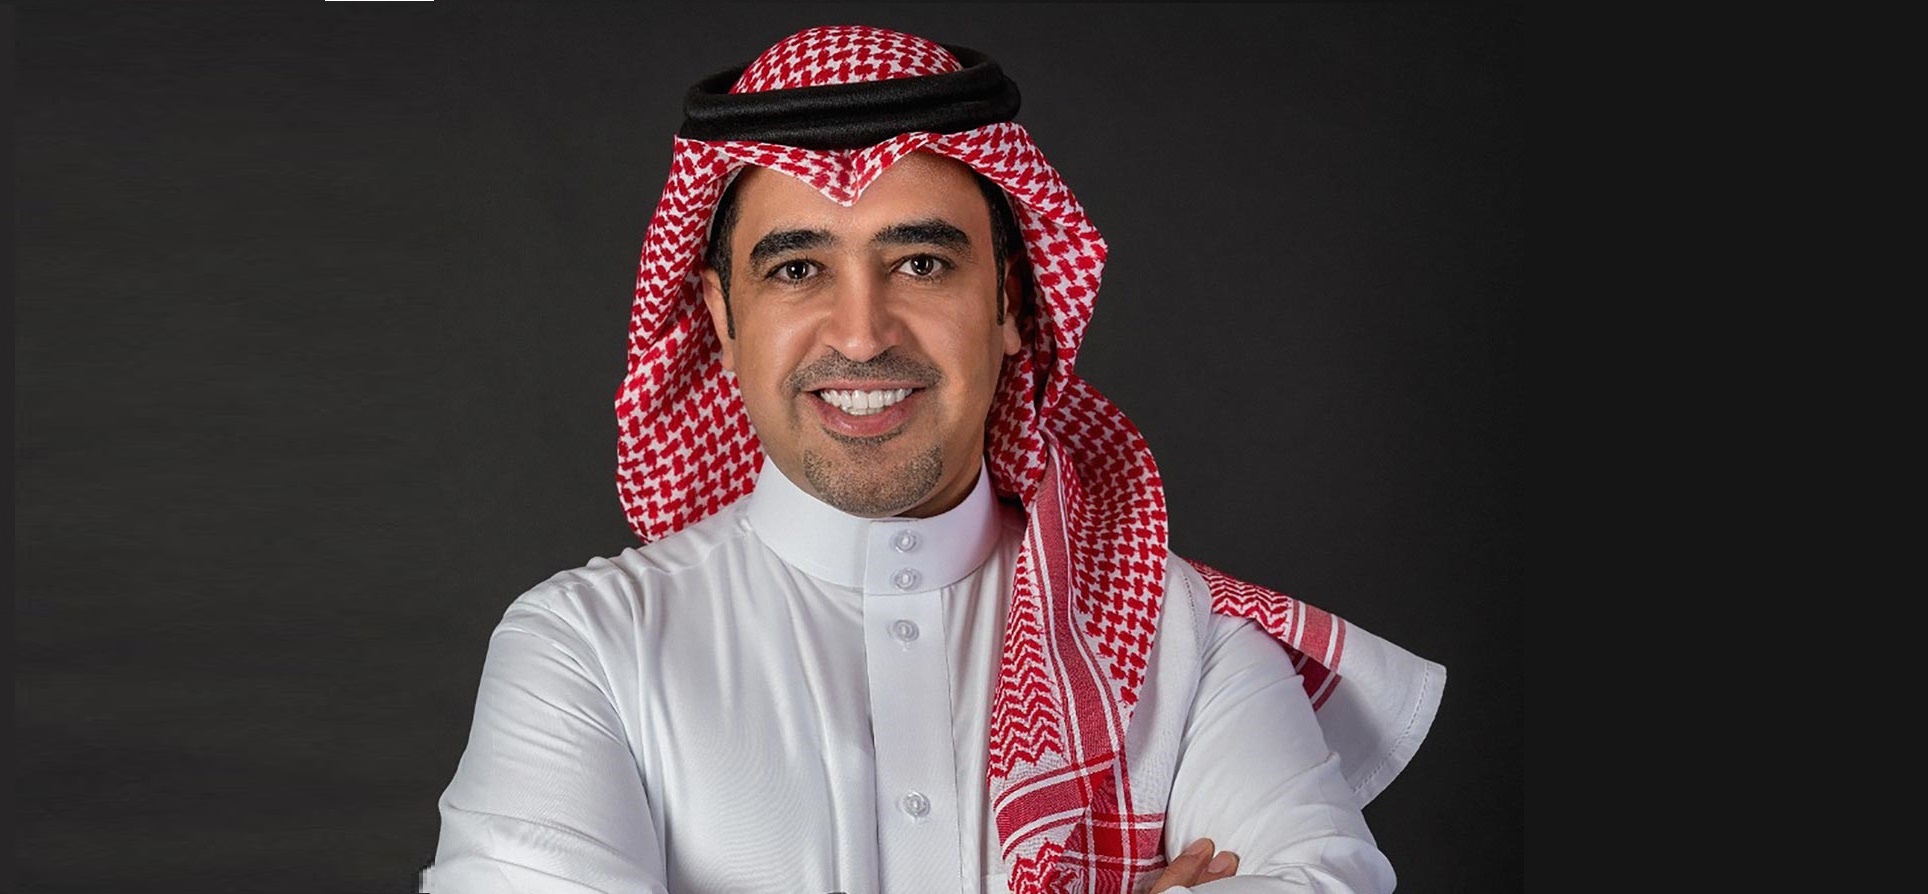 Charting KSA investment with Sultan Bader Al-Otaibi, CEO of Taiba Investments